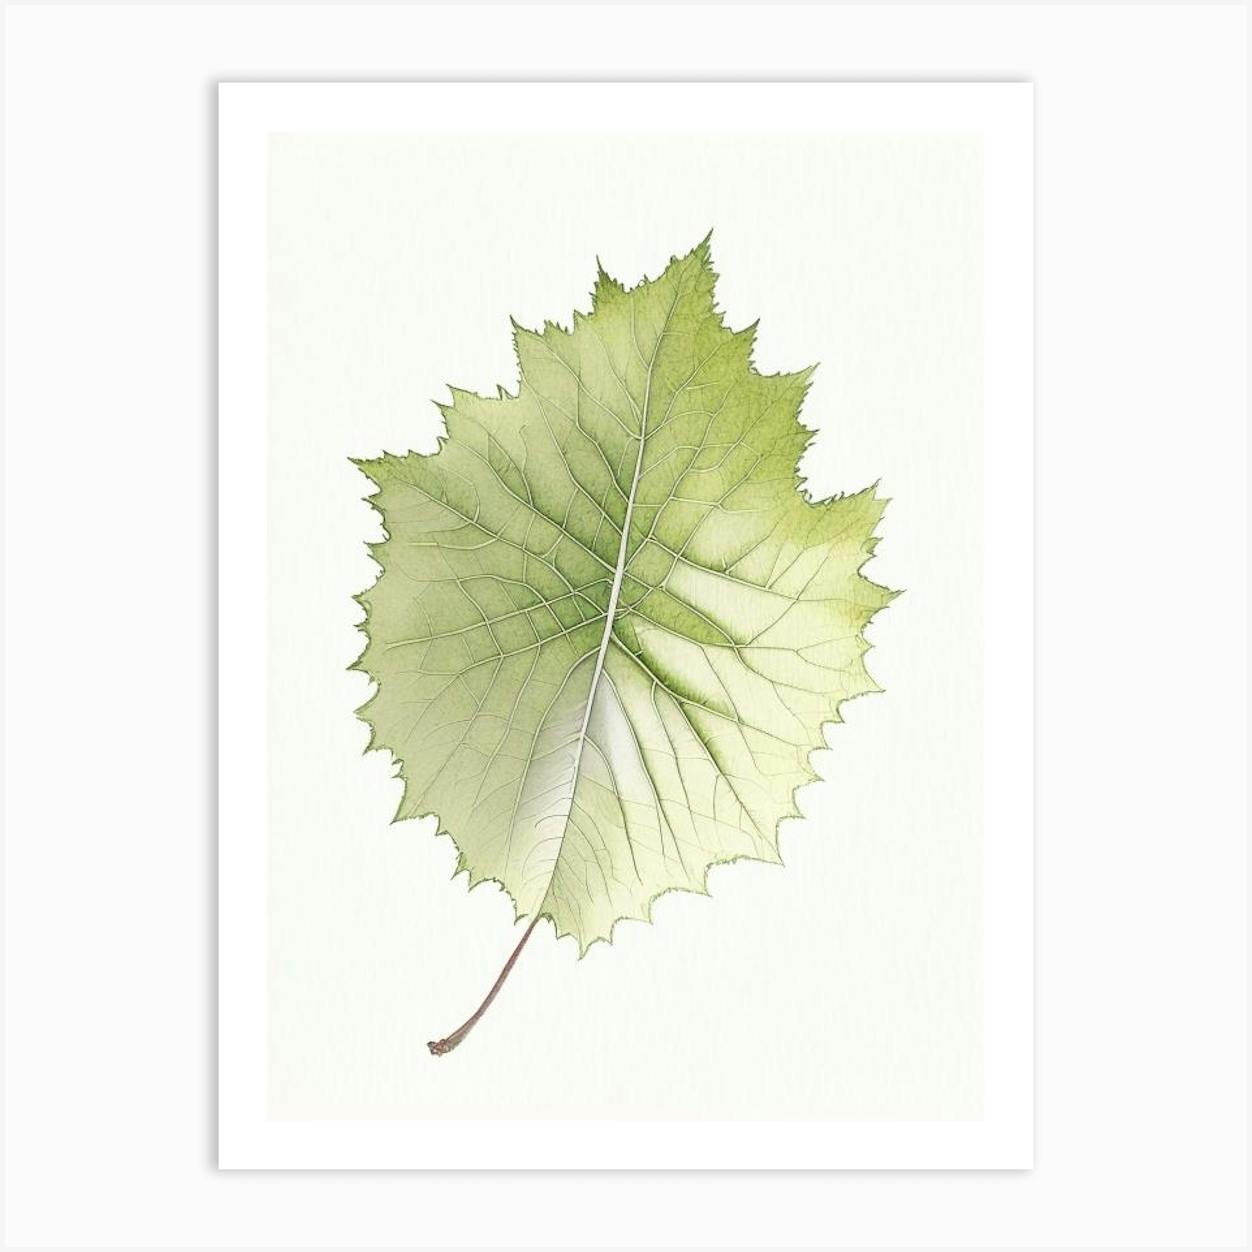 Hand drawn monochrome leaf of grape vine sketch vector illustration  isolated.: Graphic #162227745